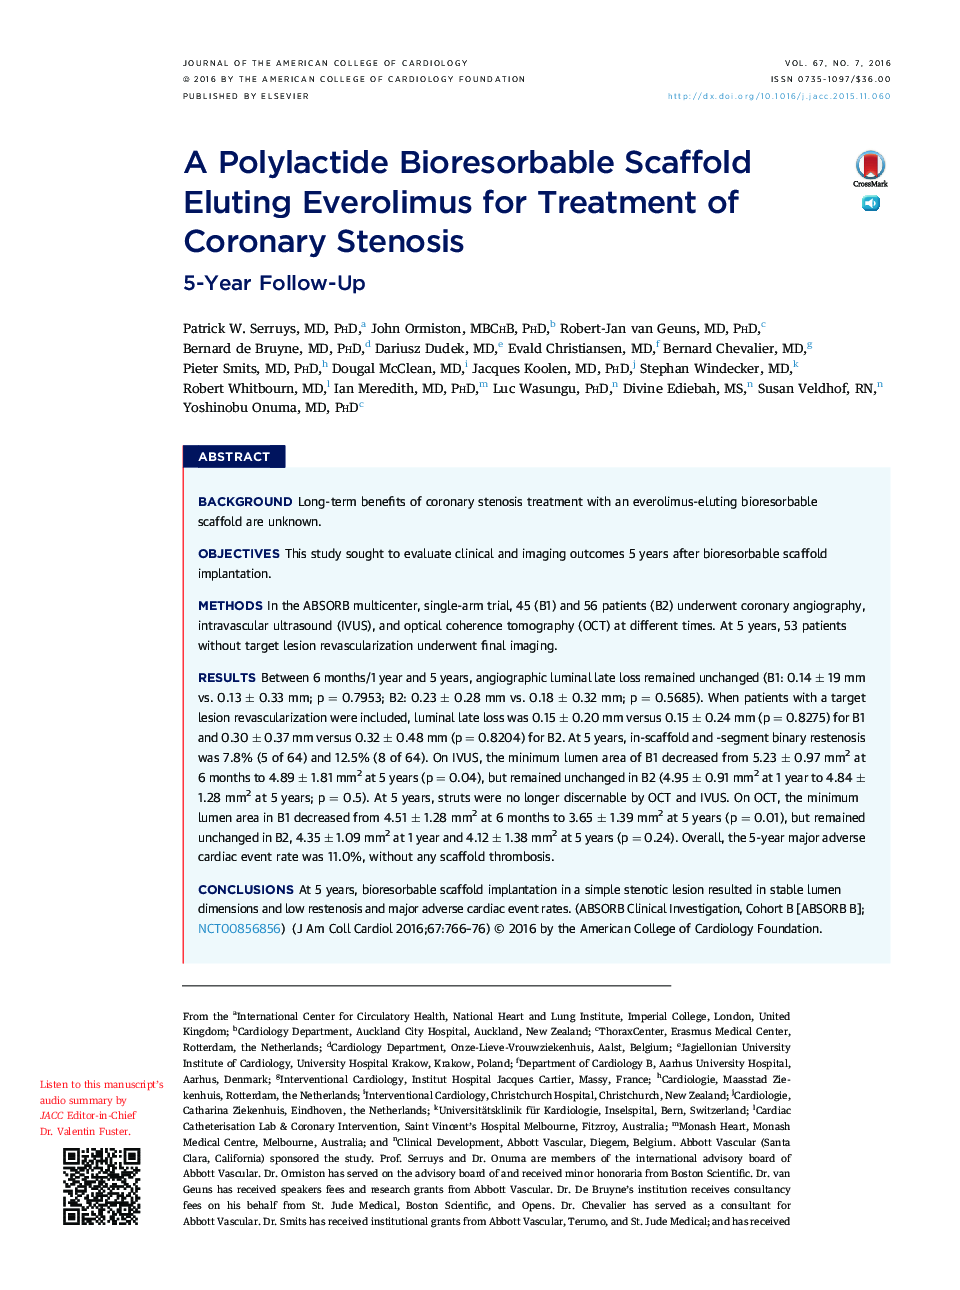 A Polylactide Bioresorbable Scaffold Eluting Everolimus for Treatment of Coronary Stenosis: 5-Year Follow-Up